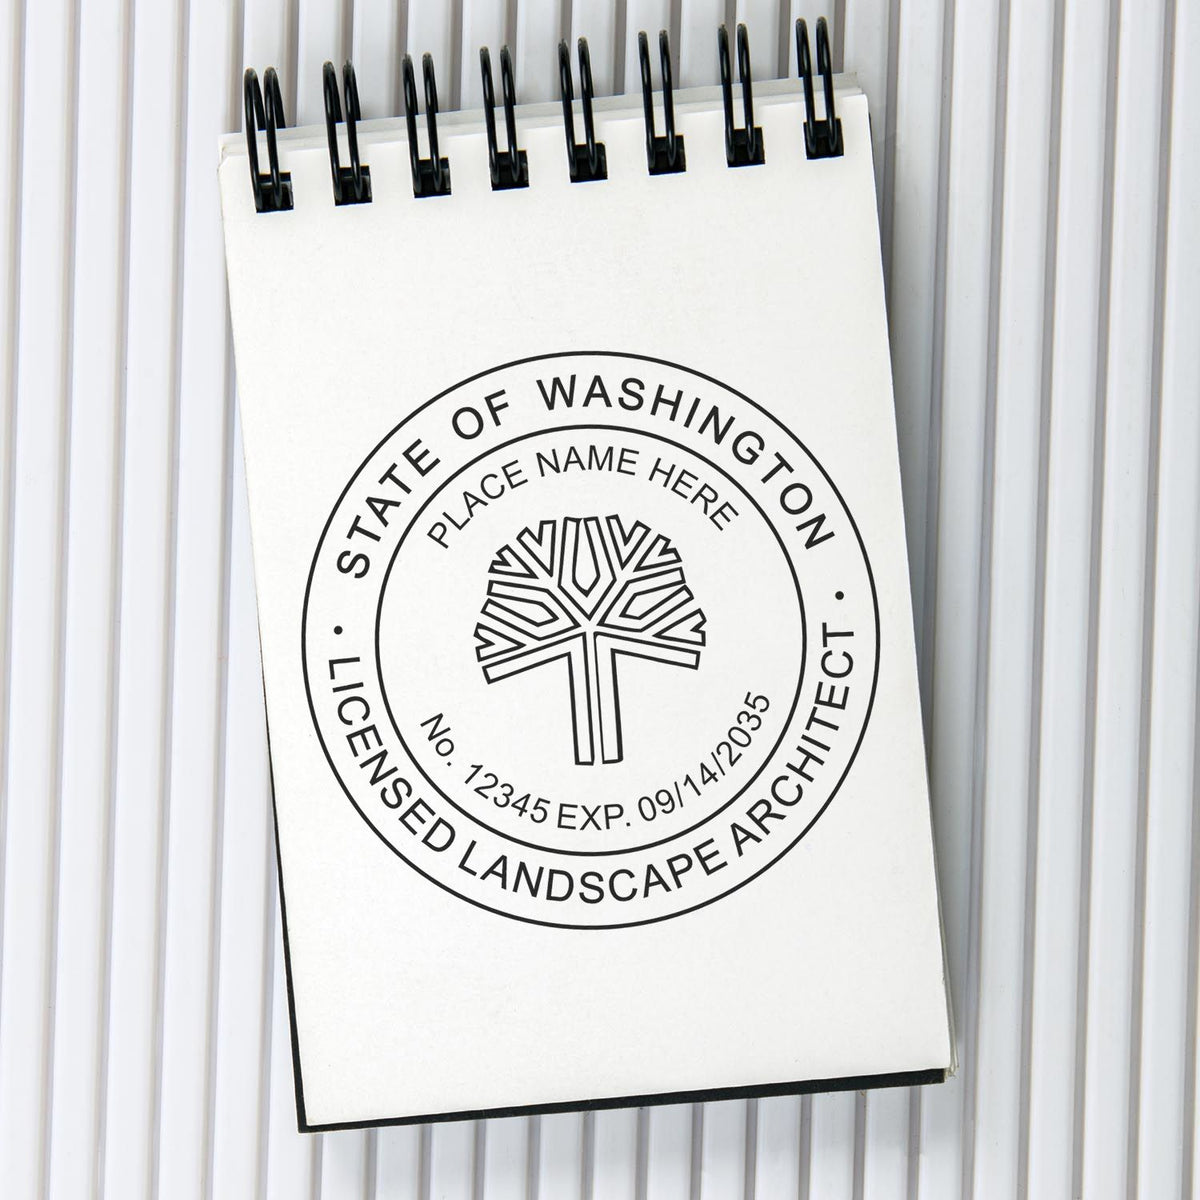 This paper is stamped with a sample imprint of the Washington Landscape Architectural Seal Stamp, signifying its quality and reliability.